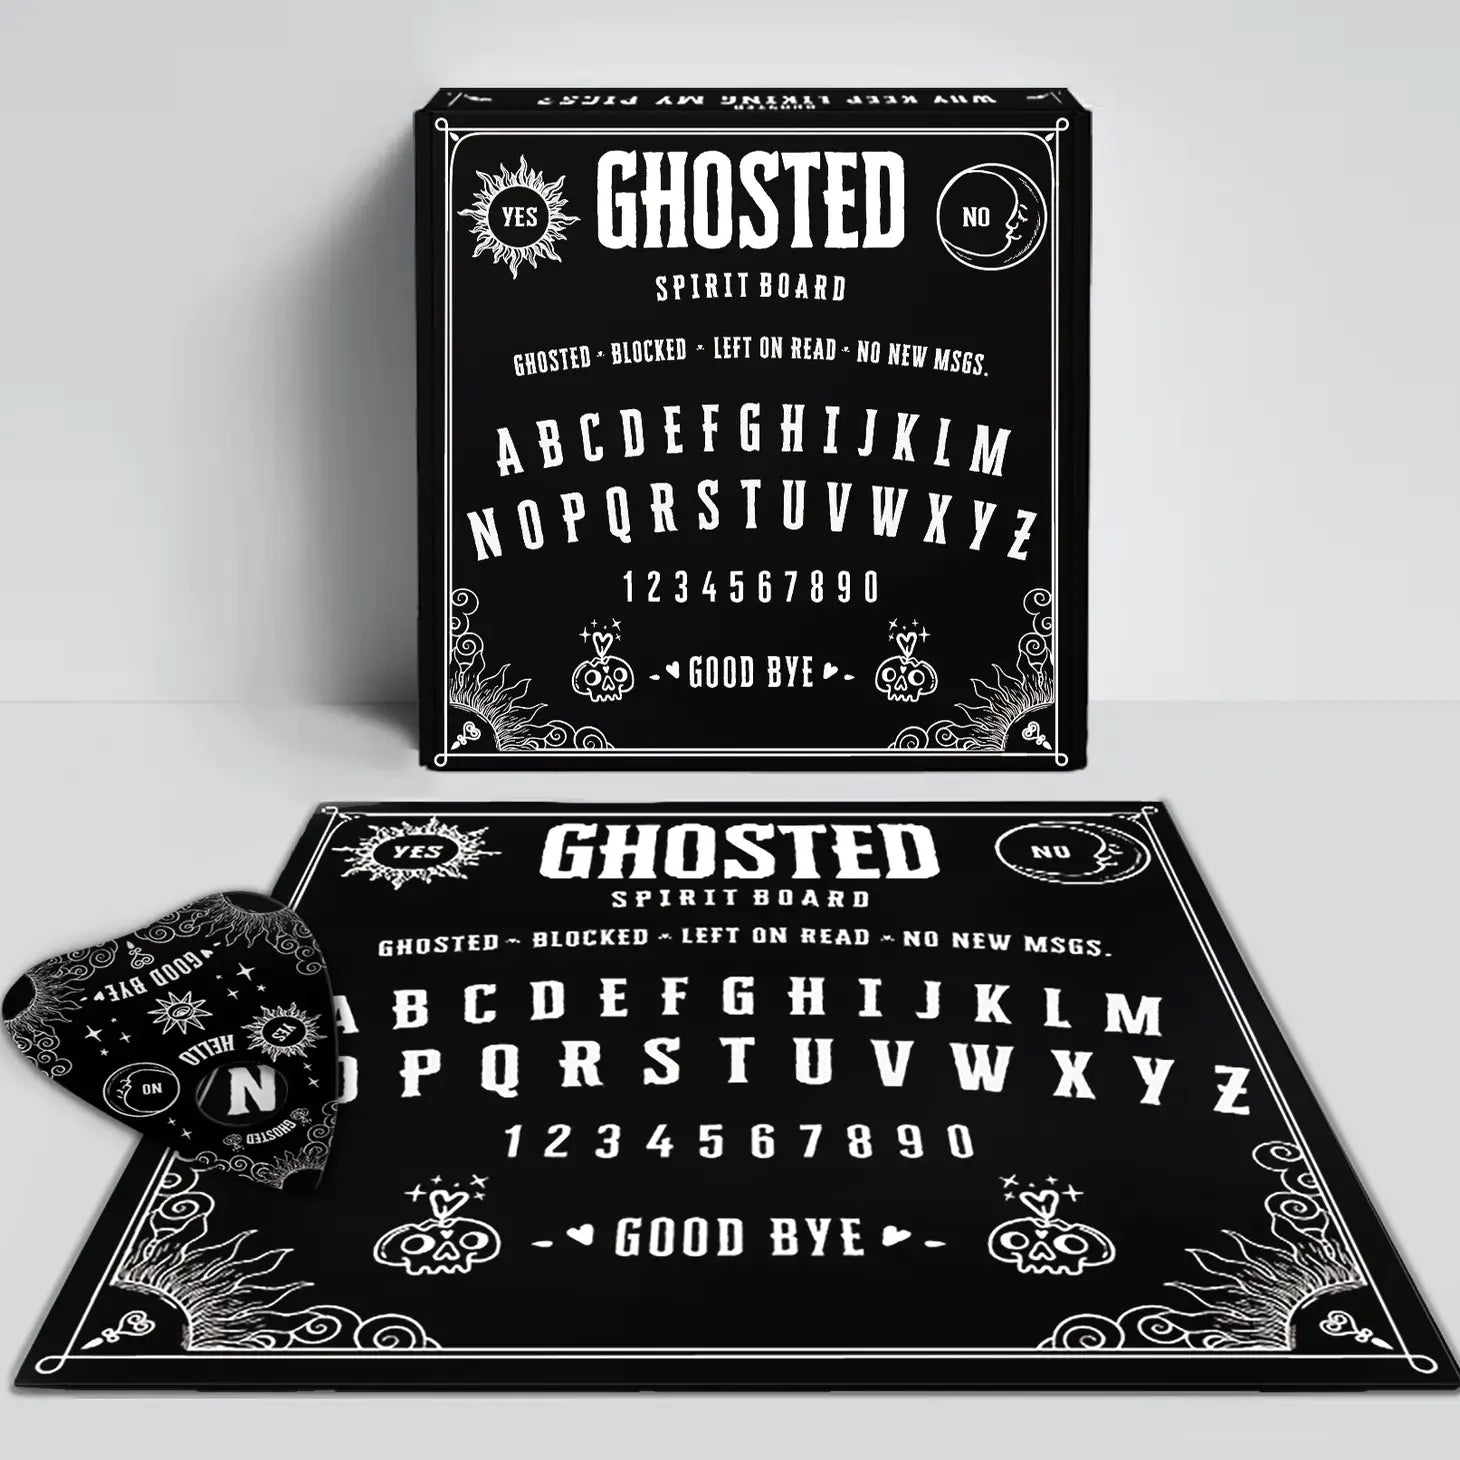 Ghosted Spirit Board